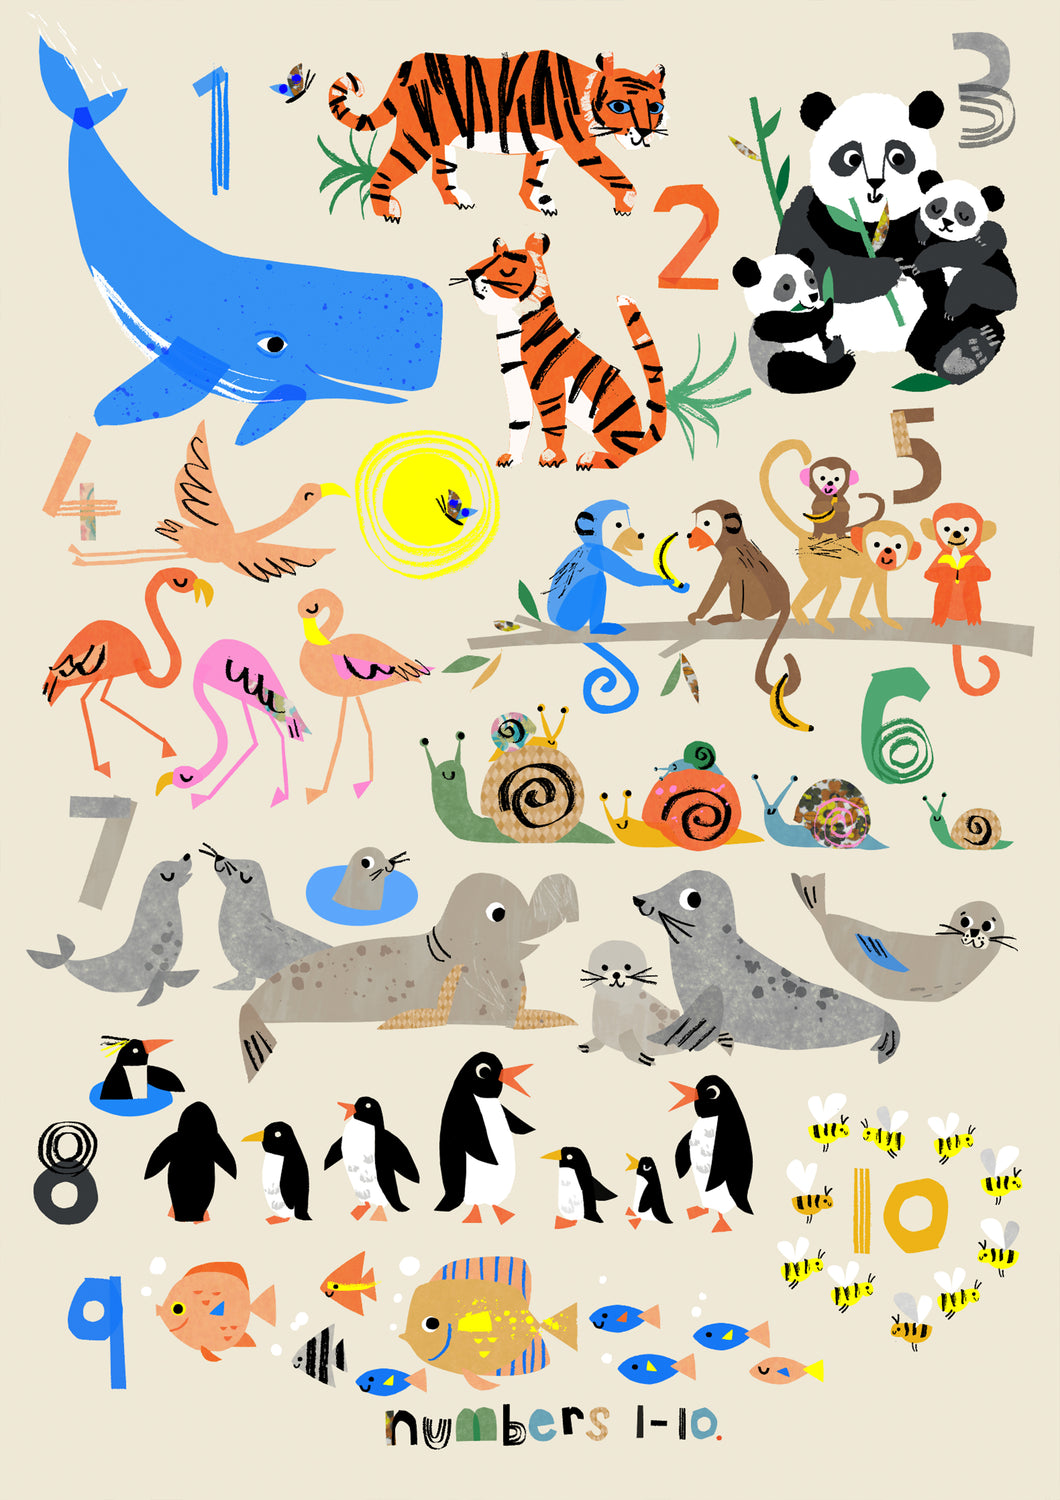 Counting Creatures GREAT & small print